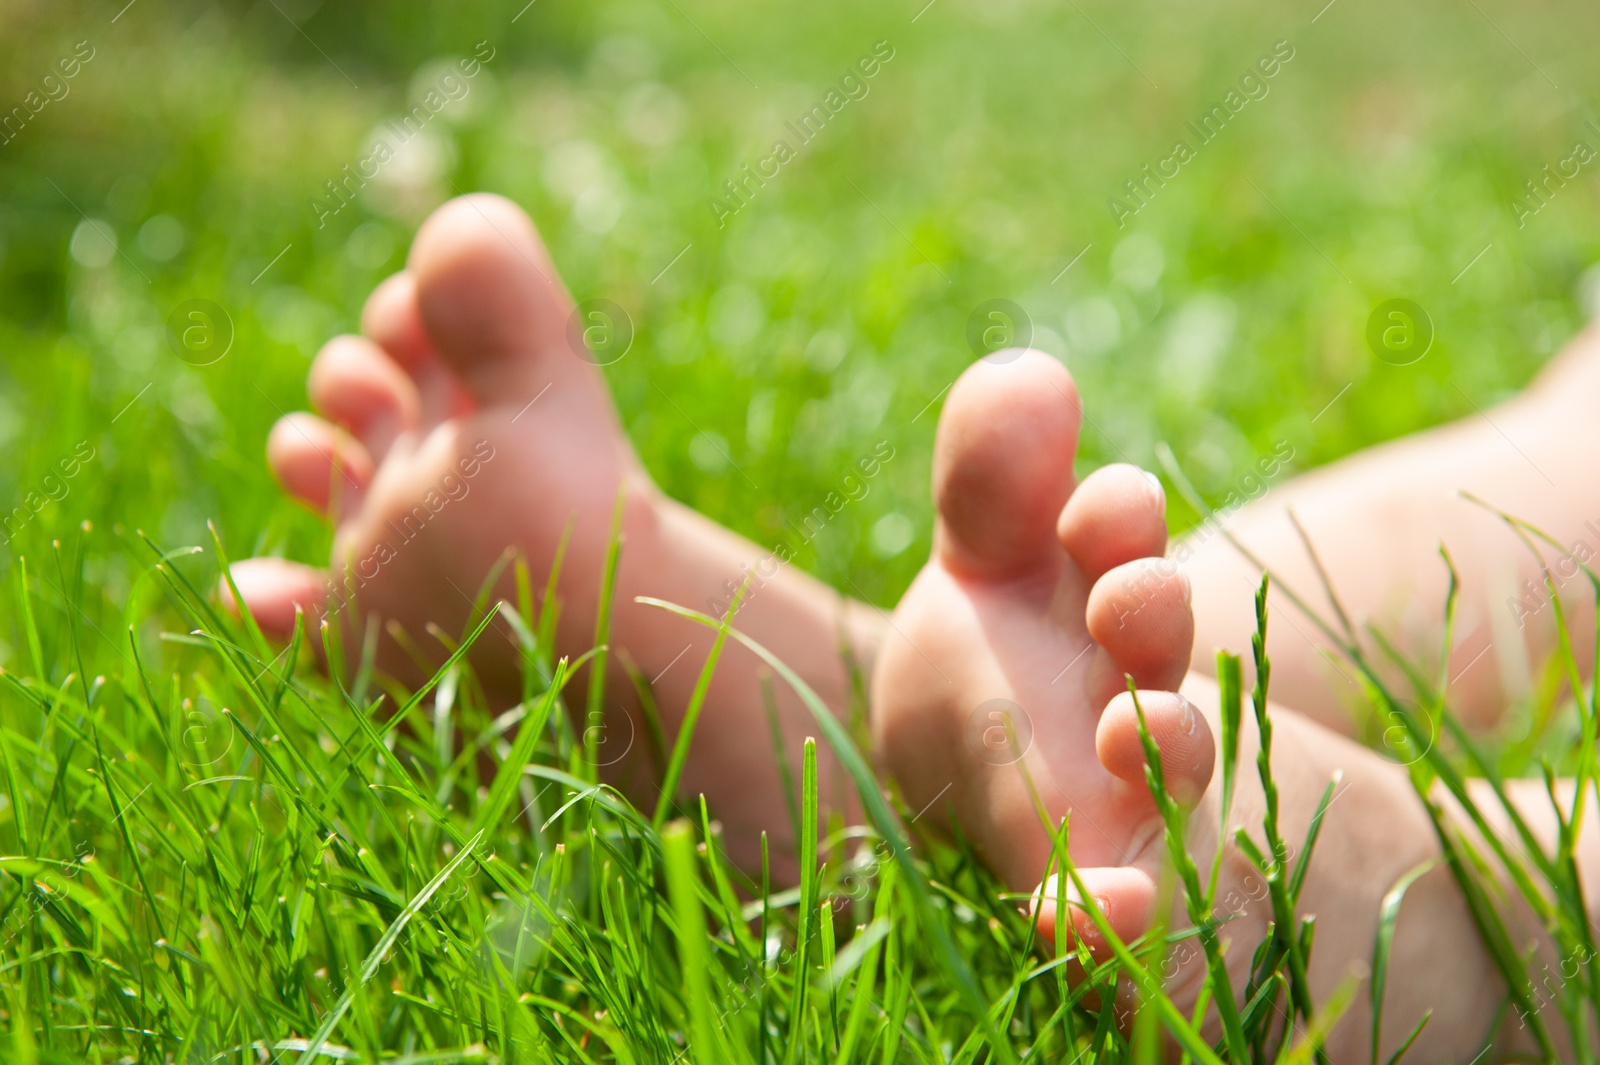 Photo of Child sitting barefoot on green grass outdoors, closeup